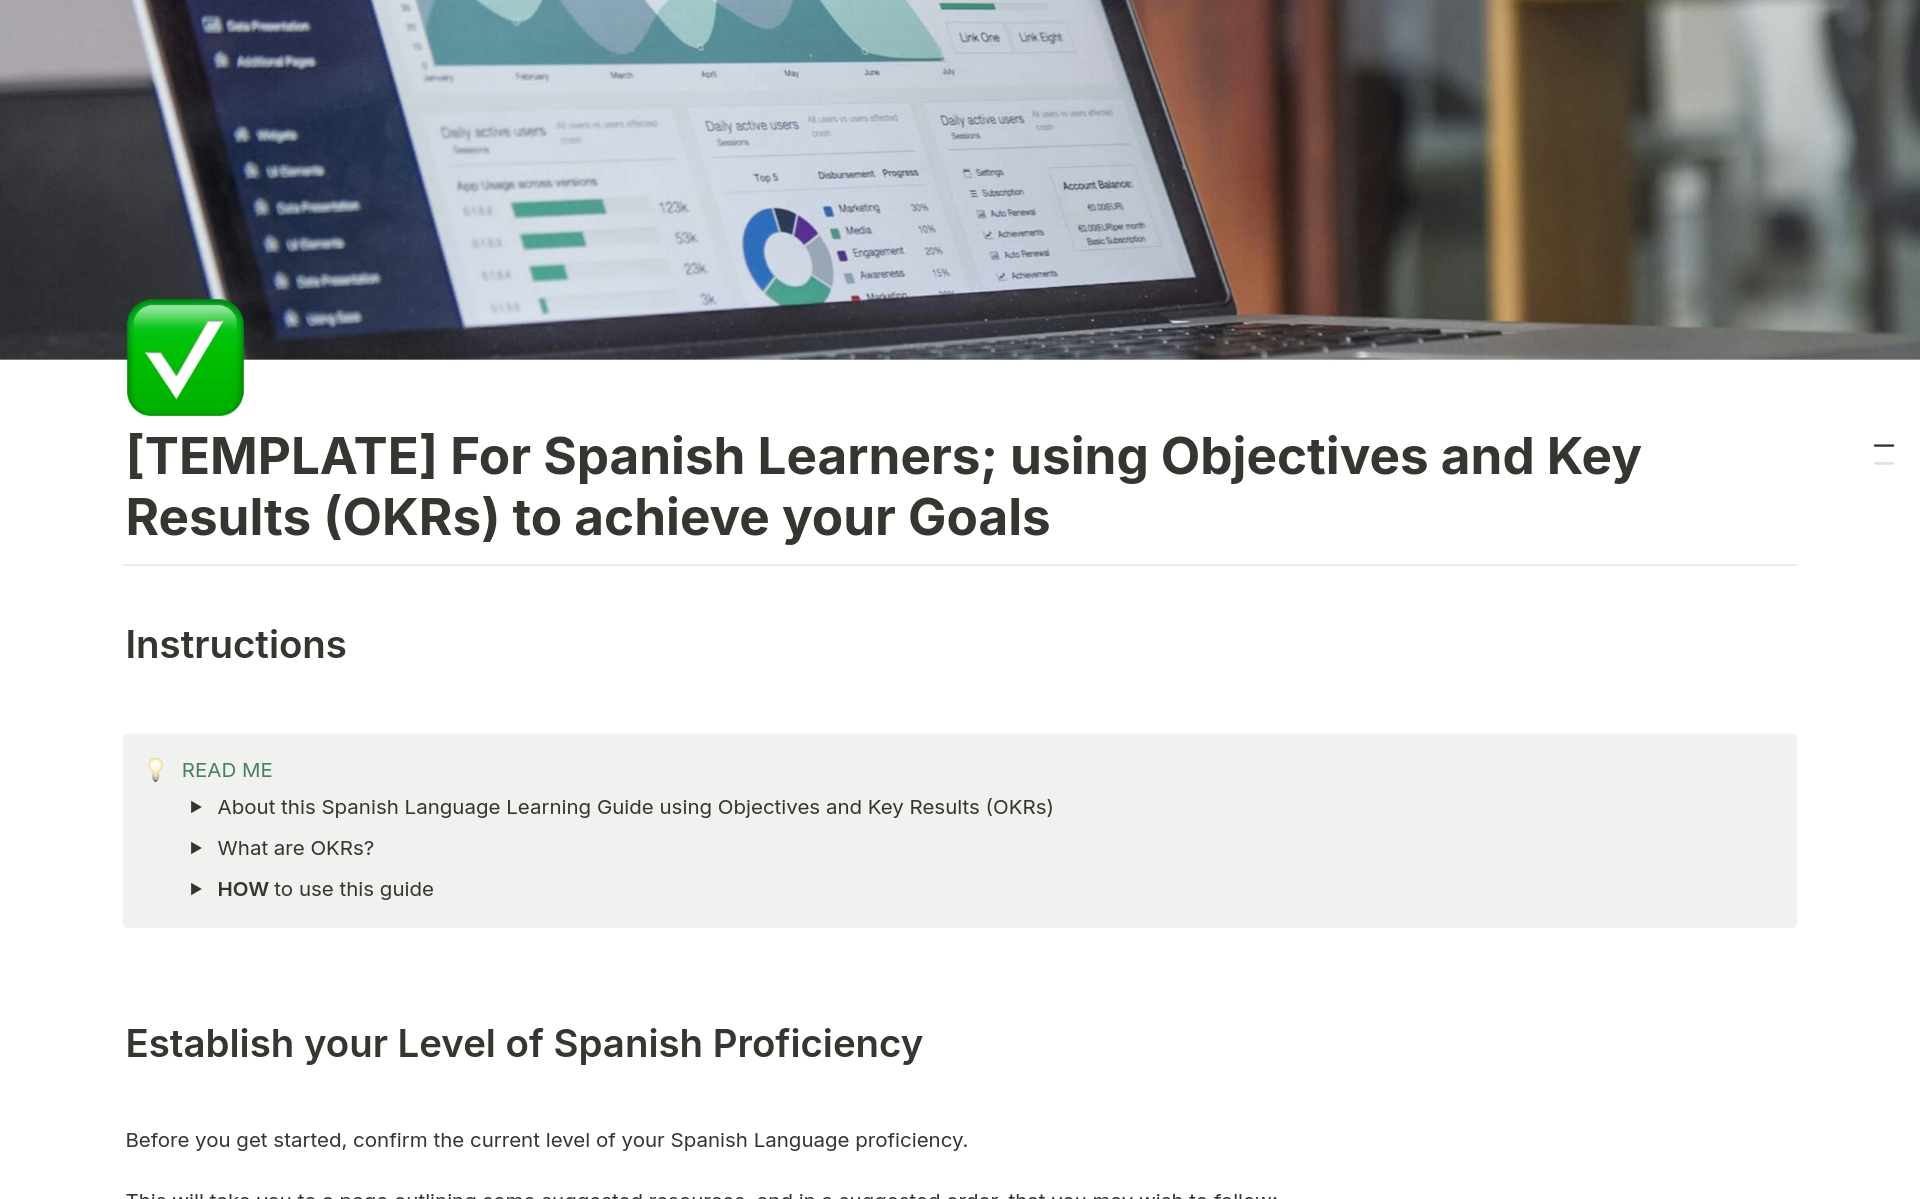 Save yourself time and find the best way for you to learn Spanish;  step by step guide taking you from Beginners through to Intermediate and Advanced Levels. 

Hold yourself accountable for your eventual success using a proven Objective and Key Results (OKRs) method. 
